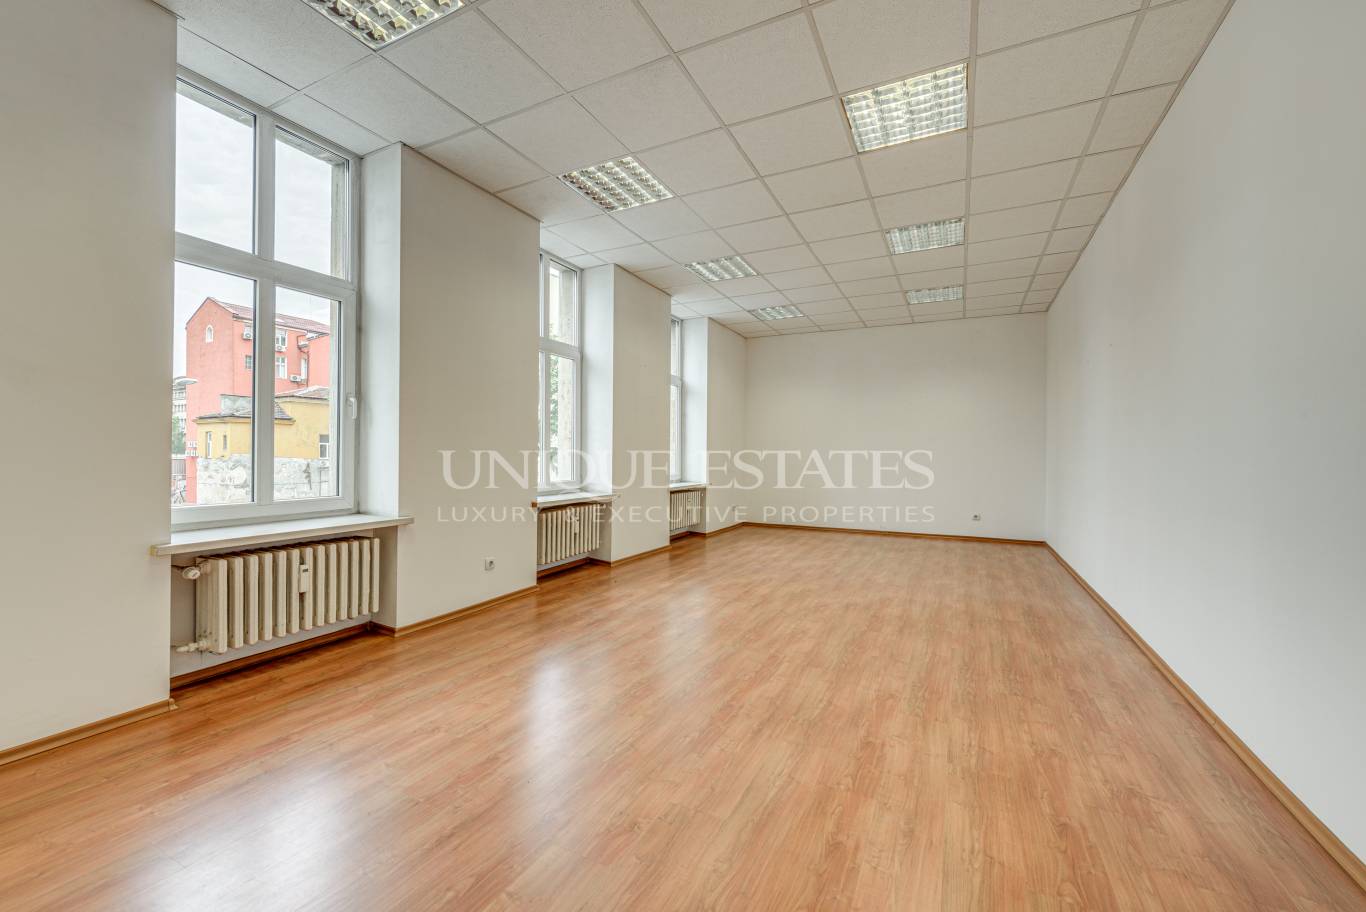 Office for rent in Sofia, Downtown with listing ID: K4831 - image 4